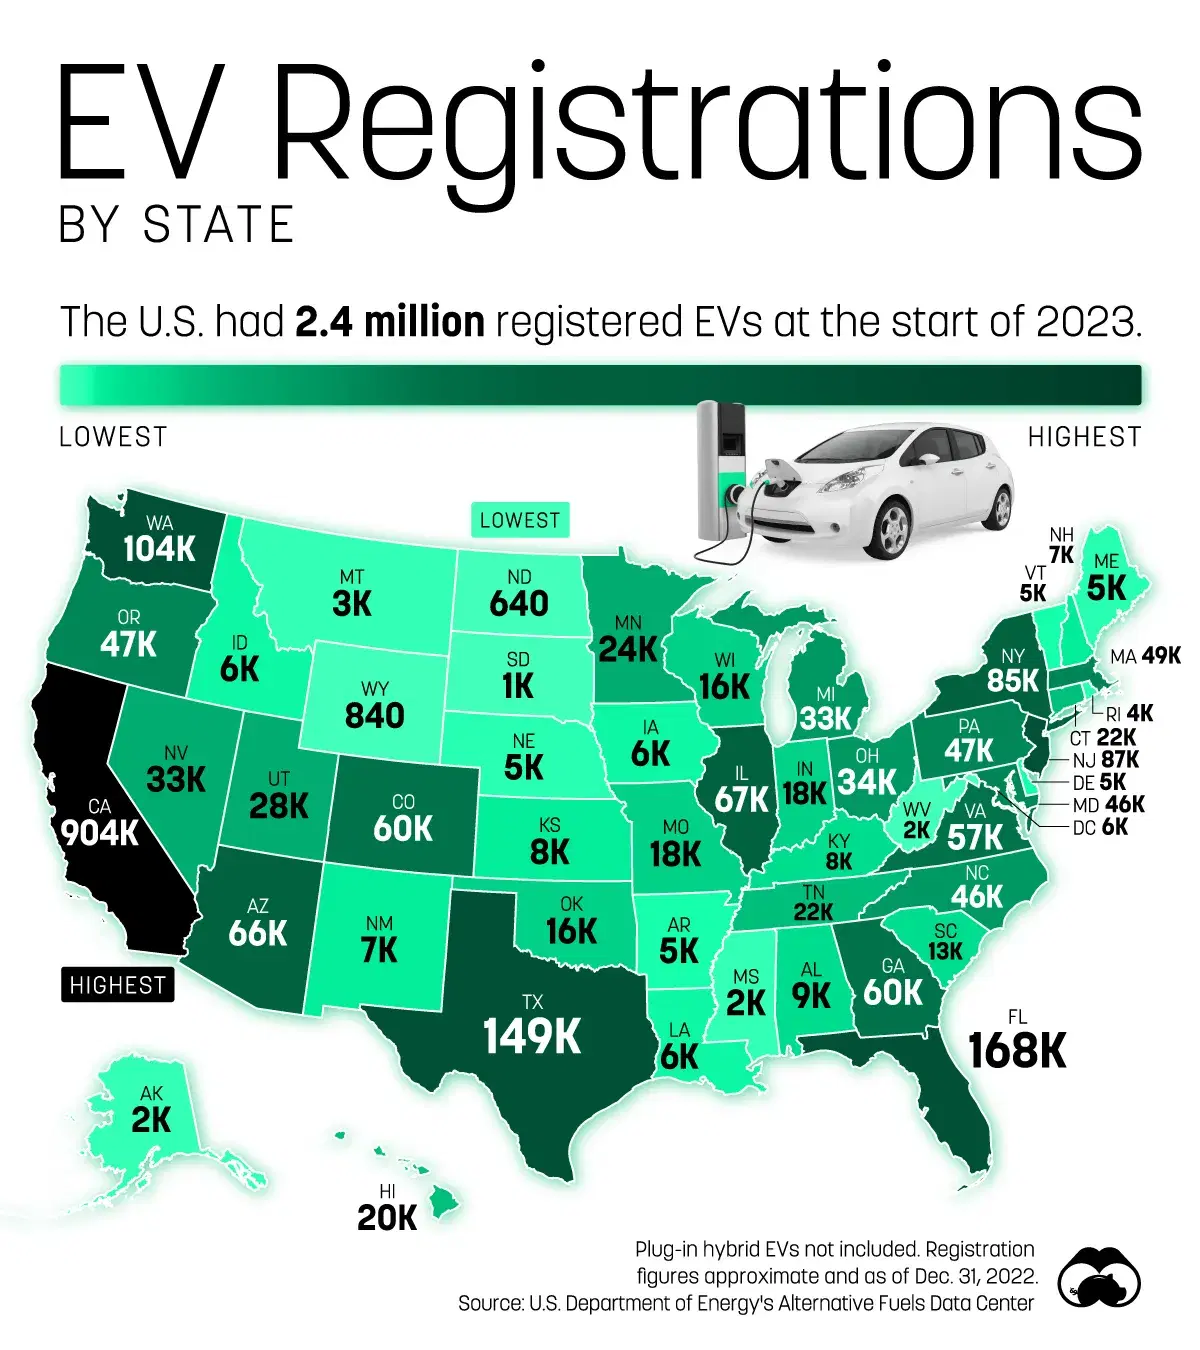 How Many EVs are Registered in Each State?